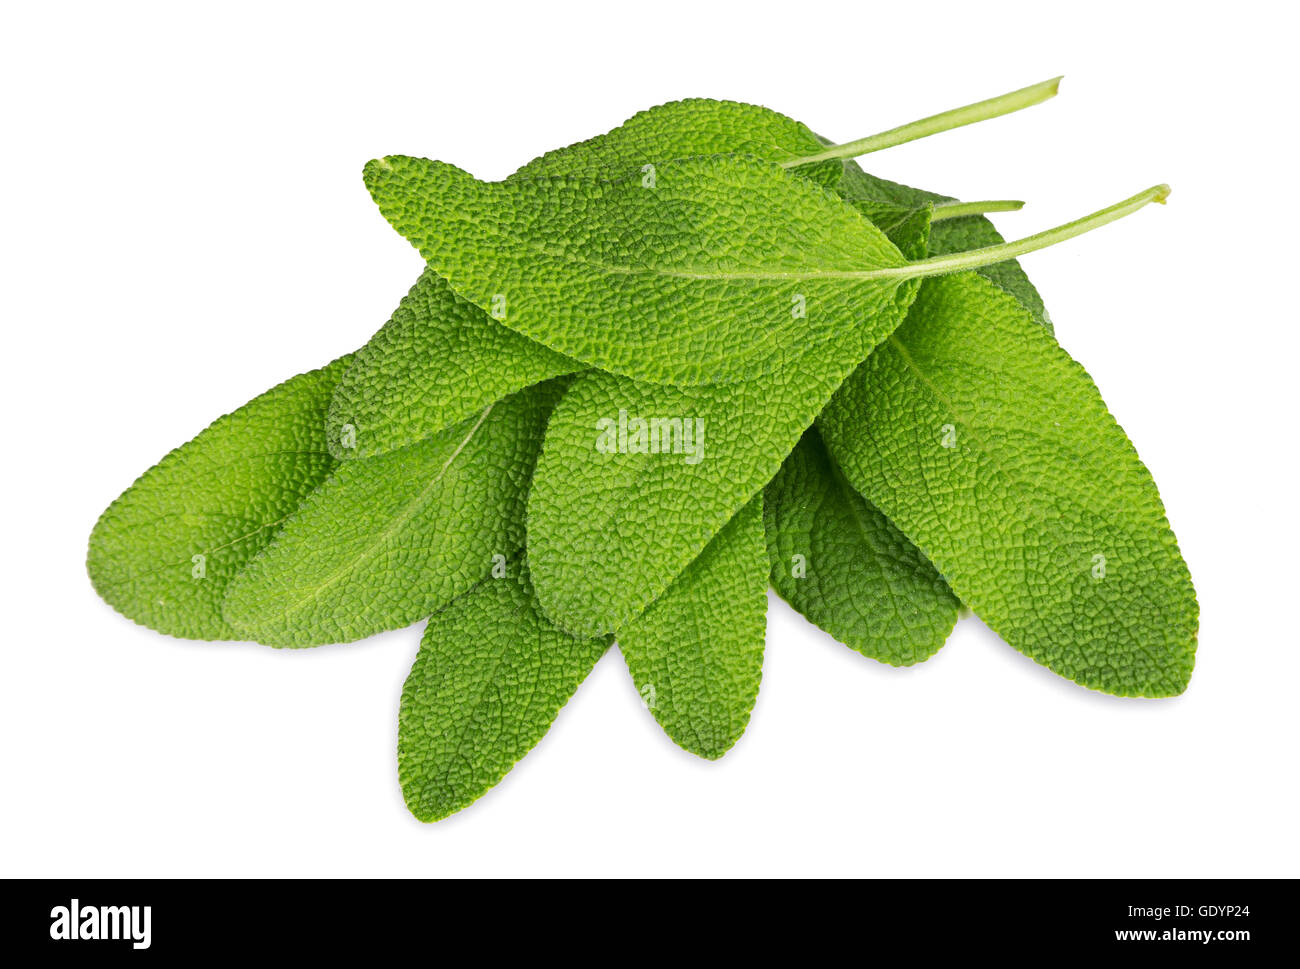 green sage herb leafs isolated on white background Stock Photo